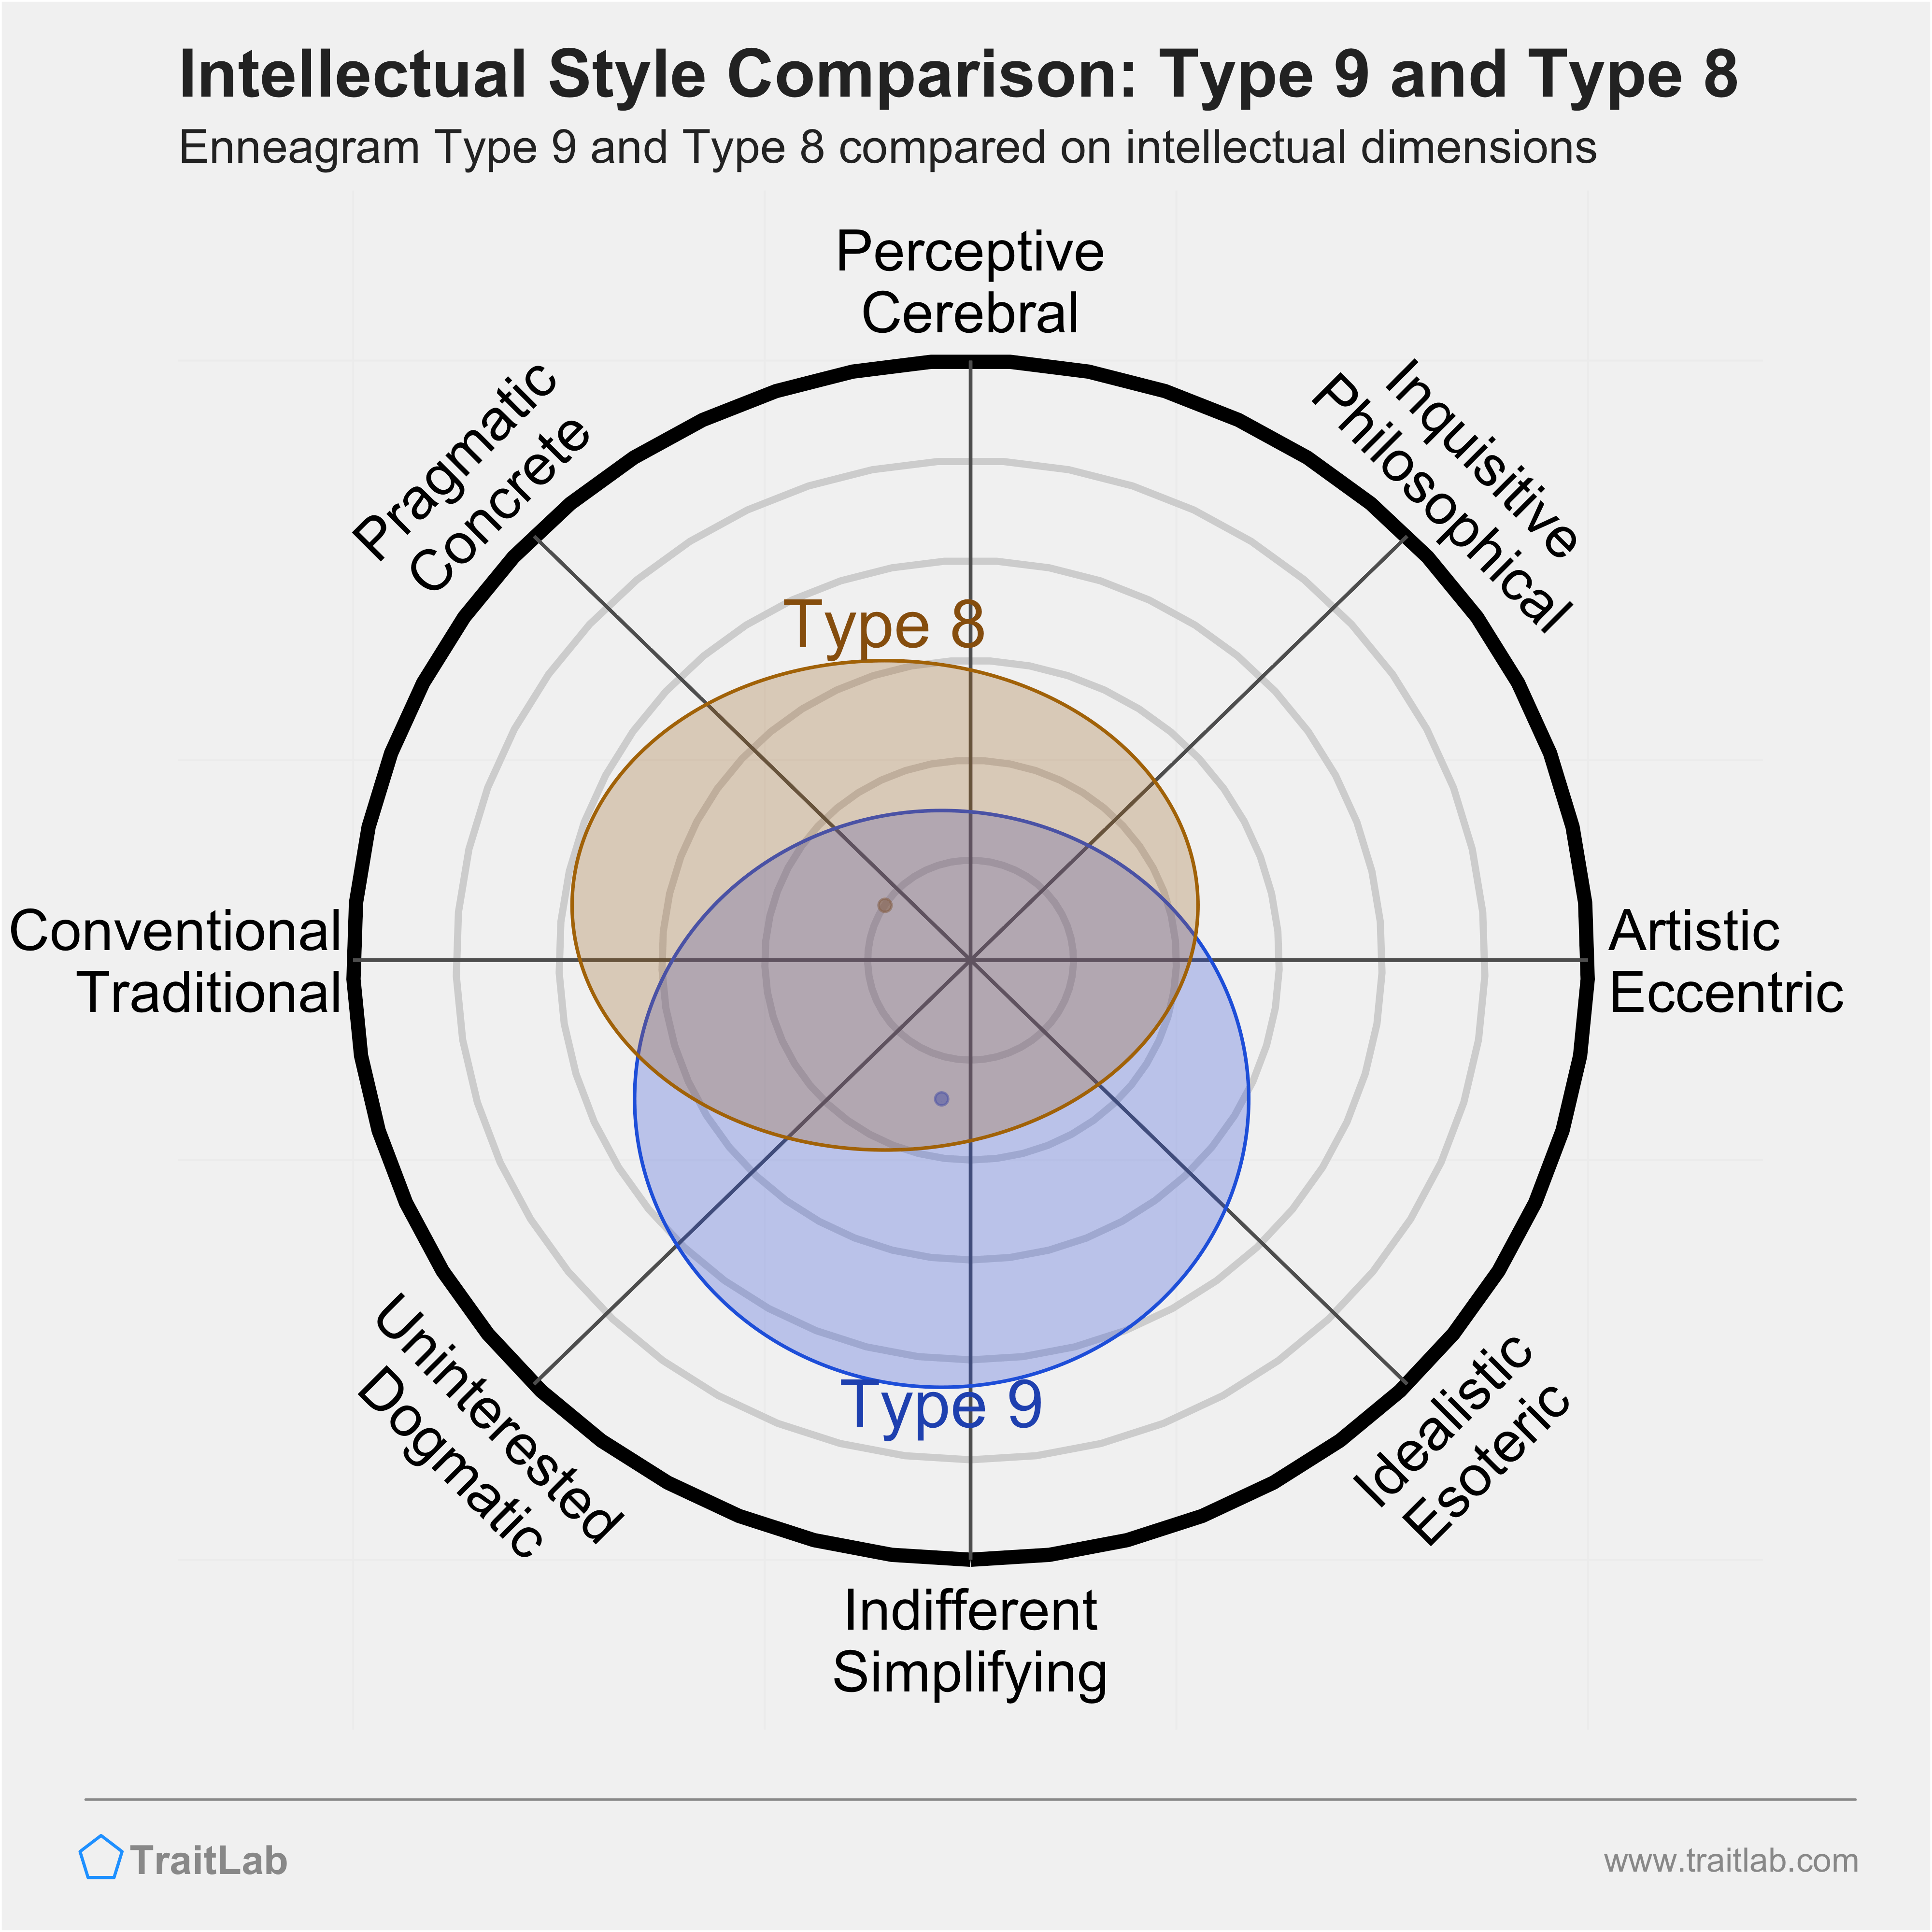 Type 9 and Type 8 comparison across intellectual dimensions